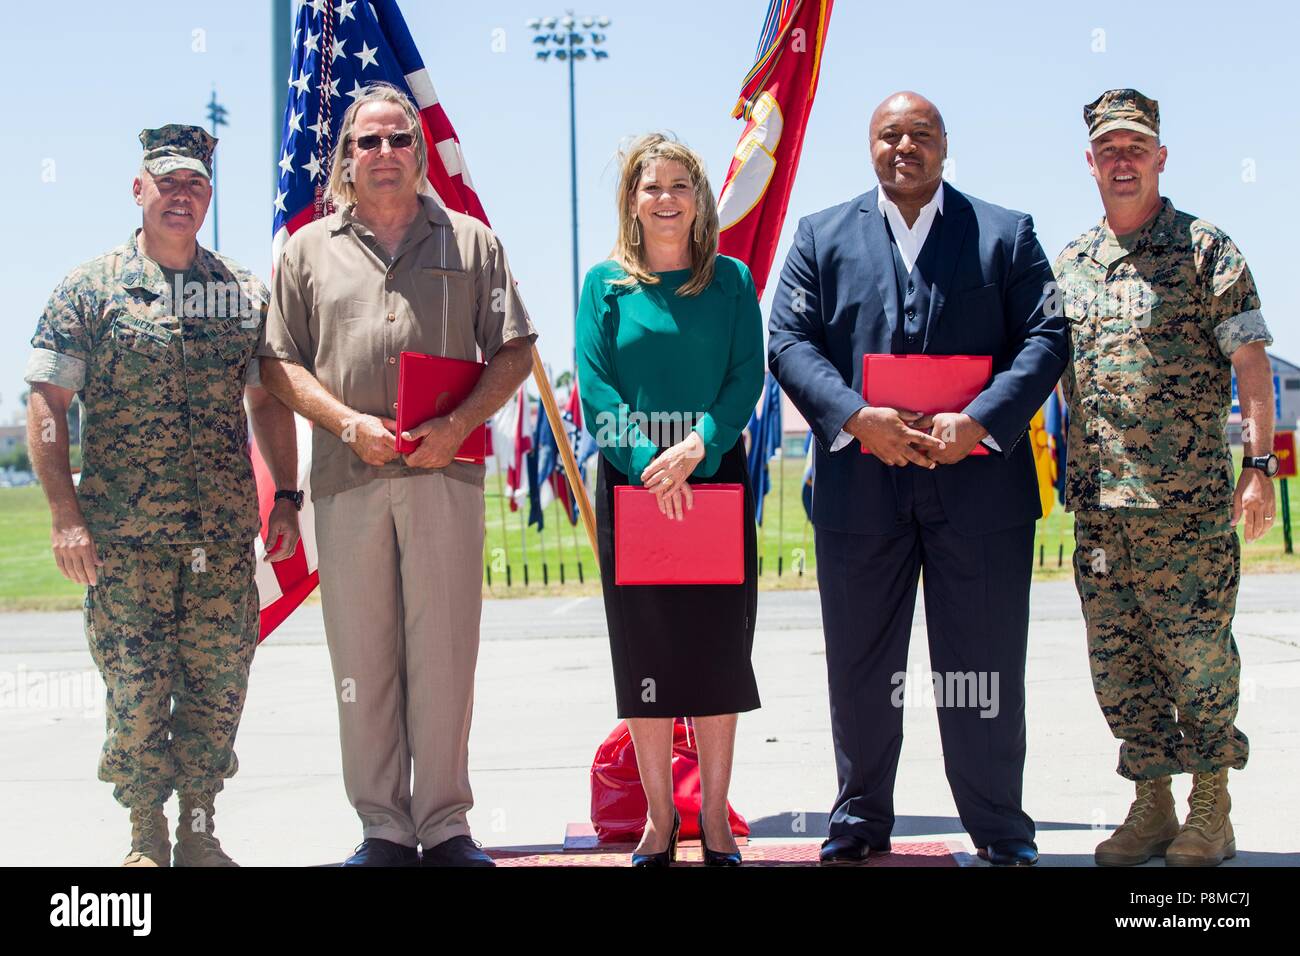 U.S. Marine Corps Brig. Gen. Kevin J. Killea, far right, commanding general, Marine Corps Installations West (MCI-W) and Sgt. Maj. Julio E. Meza, far left, sergeant major, MCI-W, take a photo with recipients of the Federal Length of Service Award at Marine Corps Base Camp Pendleton, California, June 26, 2018, June 26, 2018. Killea and Meza awarded the civilians to respect and honor their 30 years of faithful service. (U.S. Marine Corps photo by Pfc. Stephen Beard). () Stock Photo